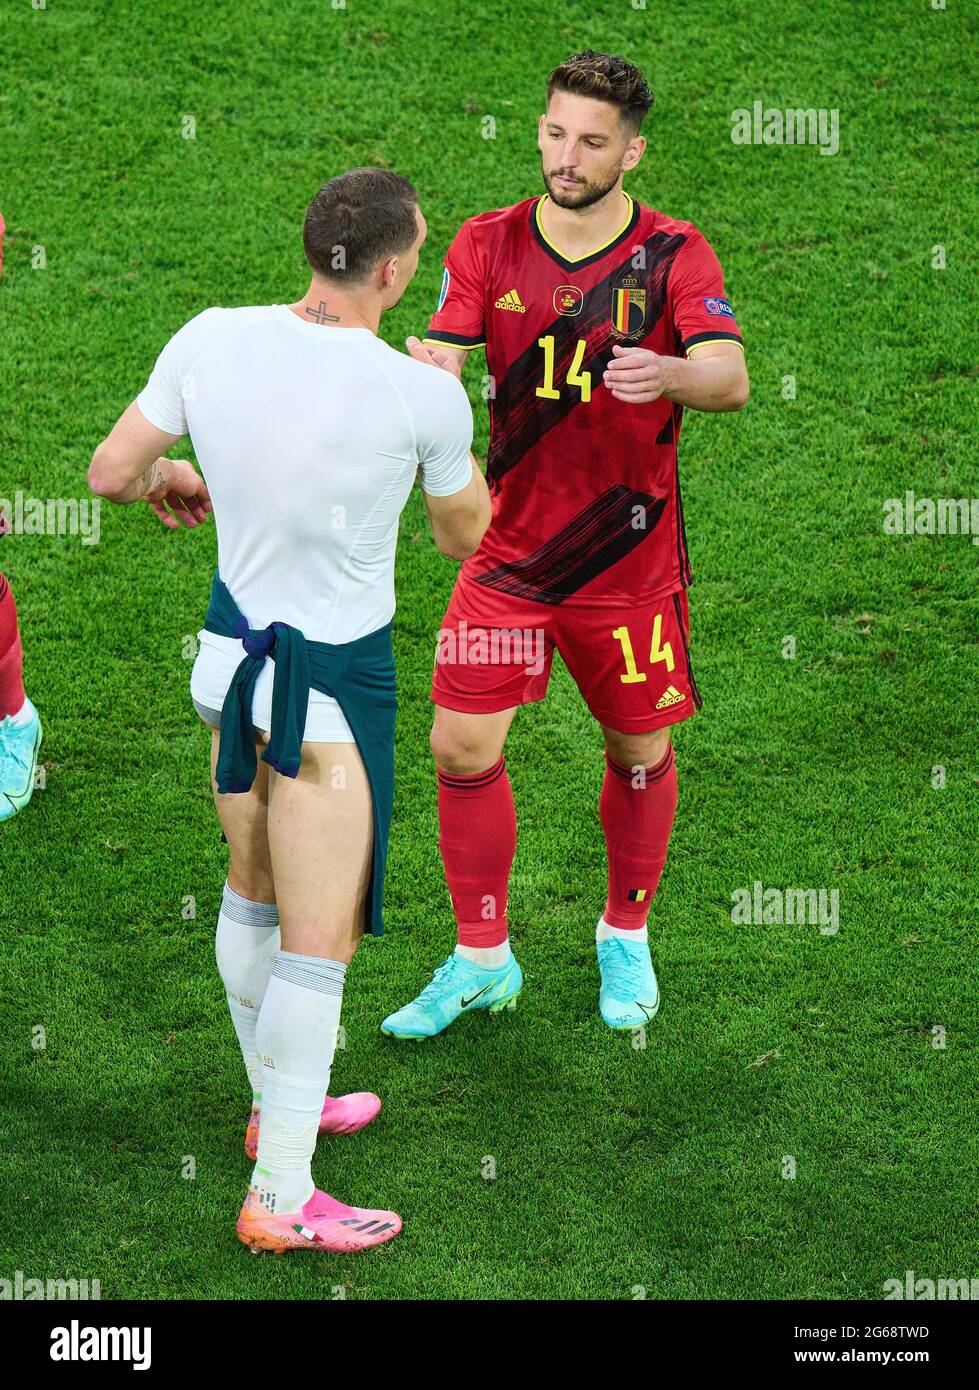 Alessandro Bastoni, ITA 23 without jersey and trousers, Dries Mertens, Belgium Nr.14  in the quarterfinal match BELGIUM - ITALY 1-2 at the football UEFA European Championships 2020 in Season 2020/2021 on July 02, 2021  in Munich, Germany. © Peter Schatz / Alamy Live News Stock Photo